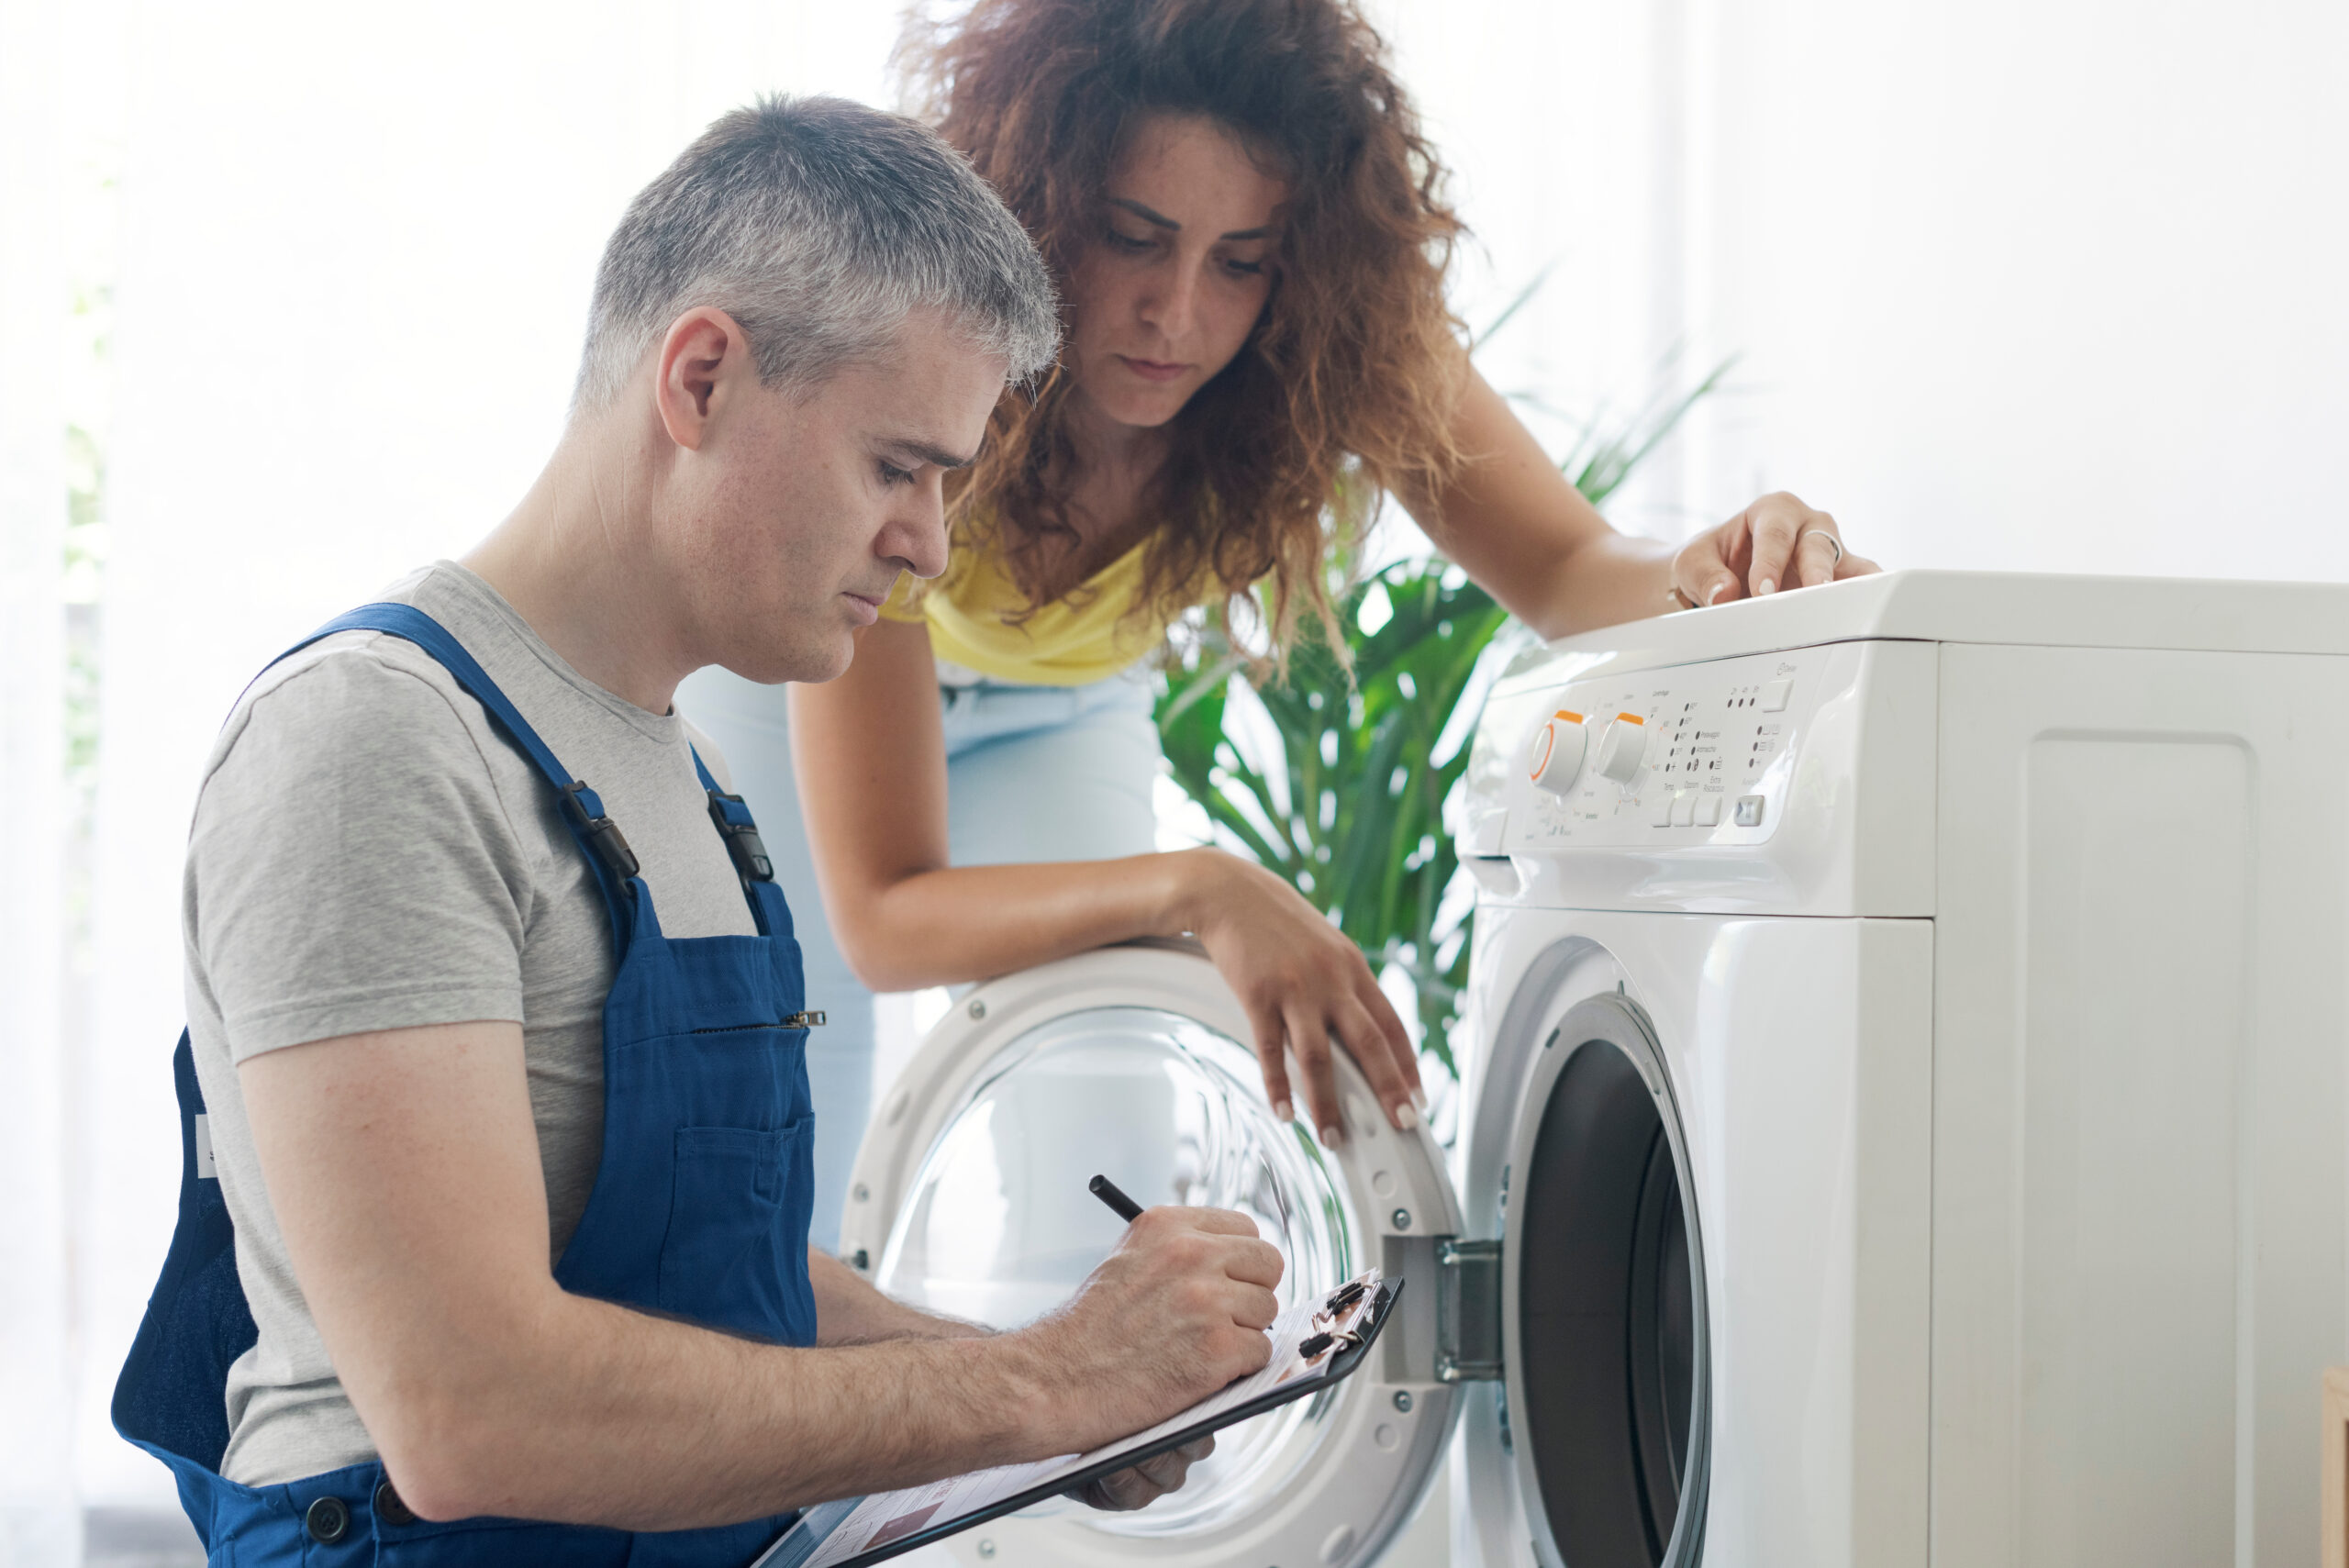 Two people working together to fix a washing machine